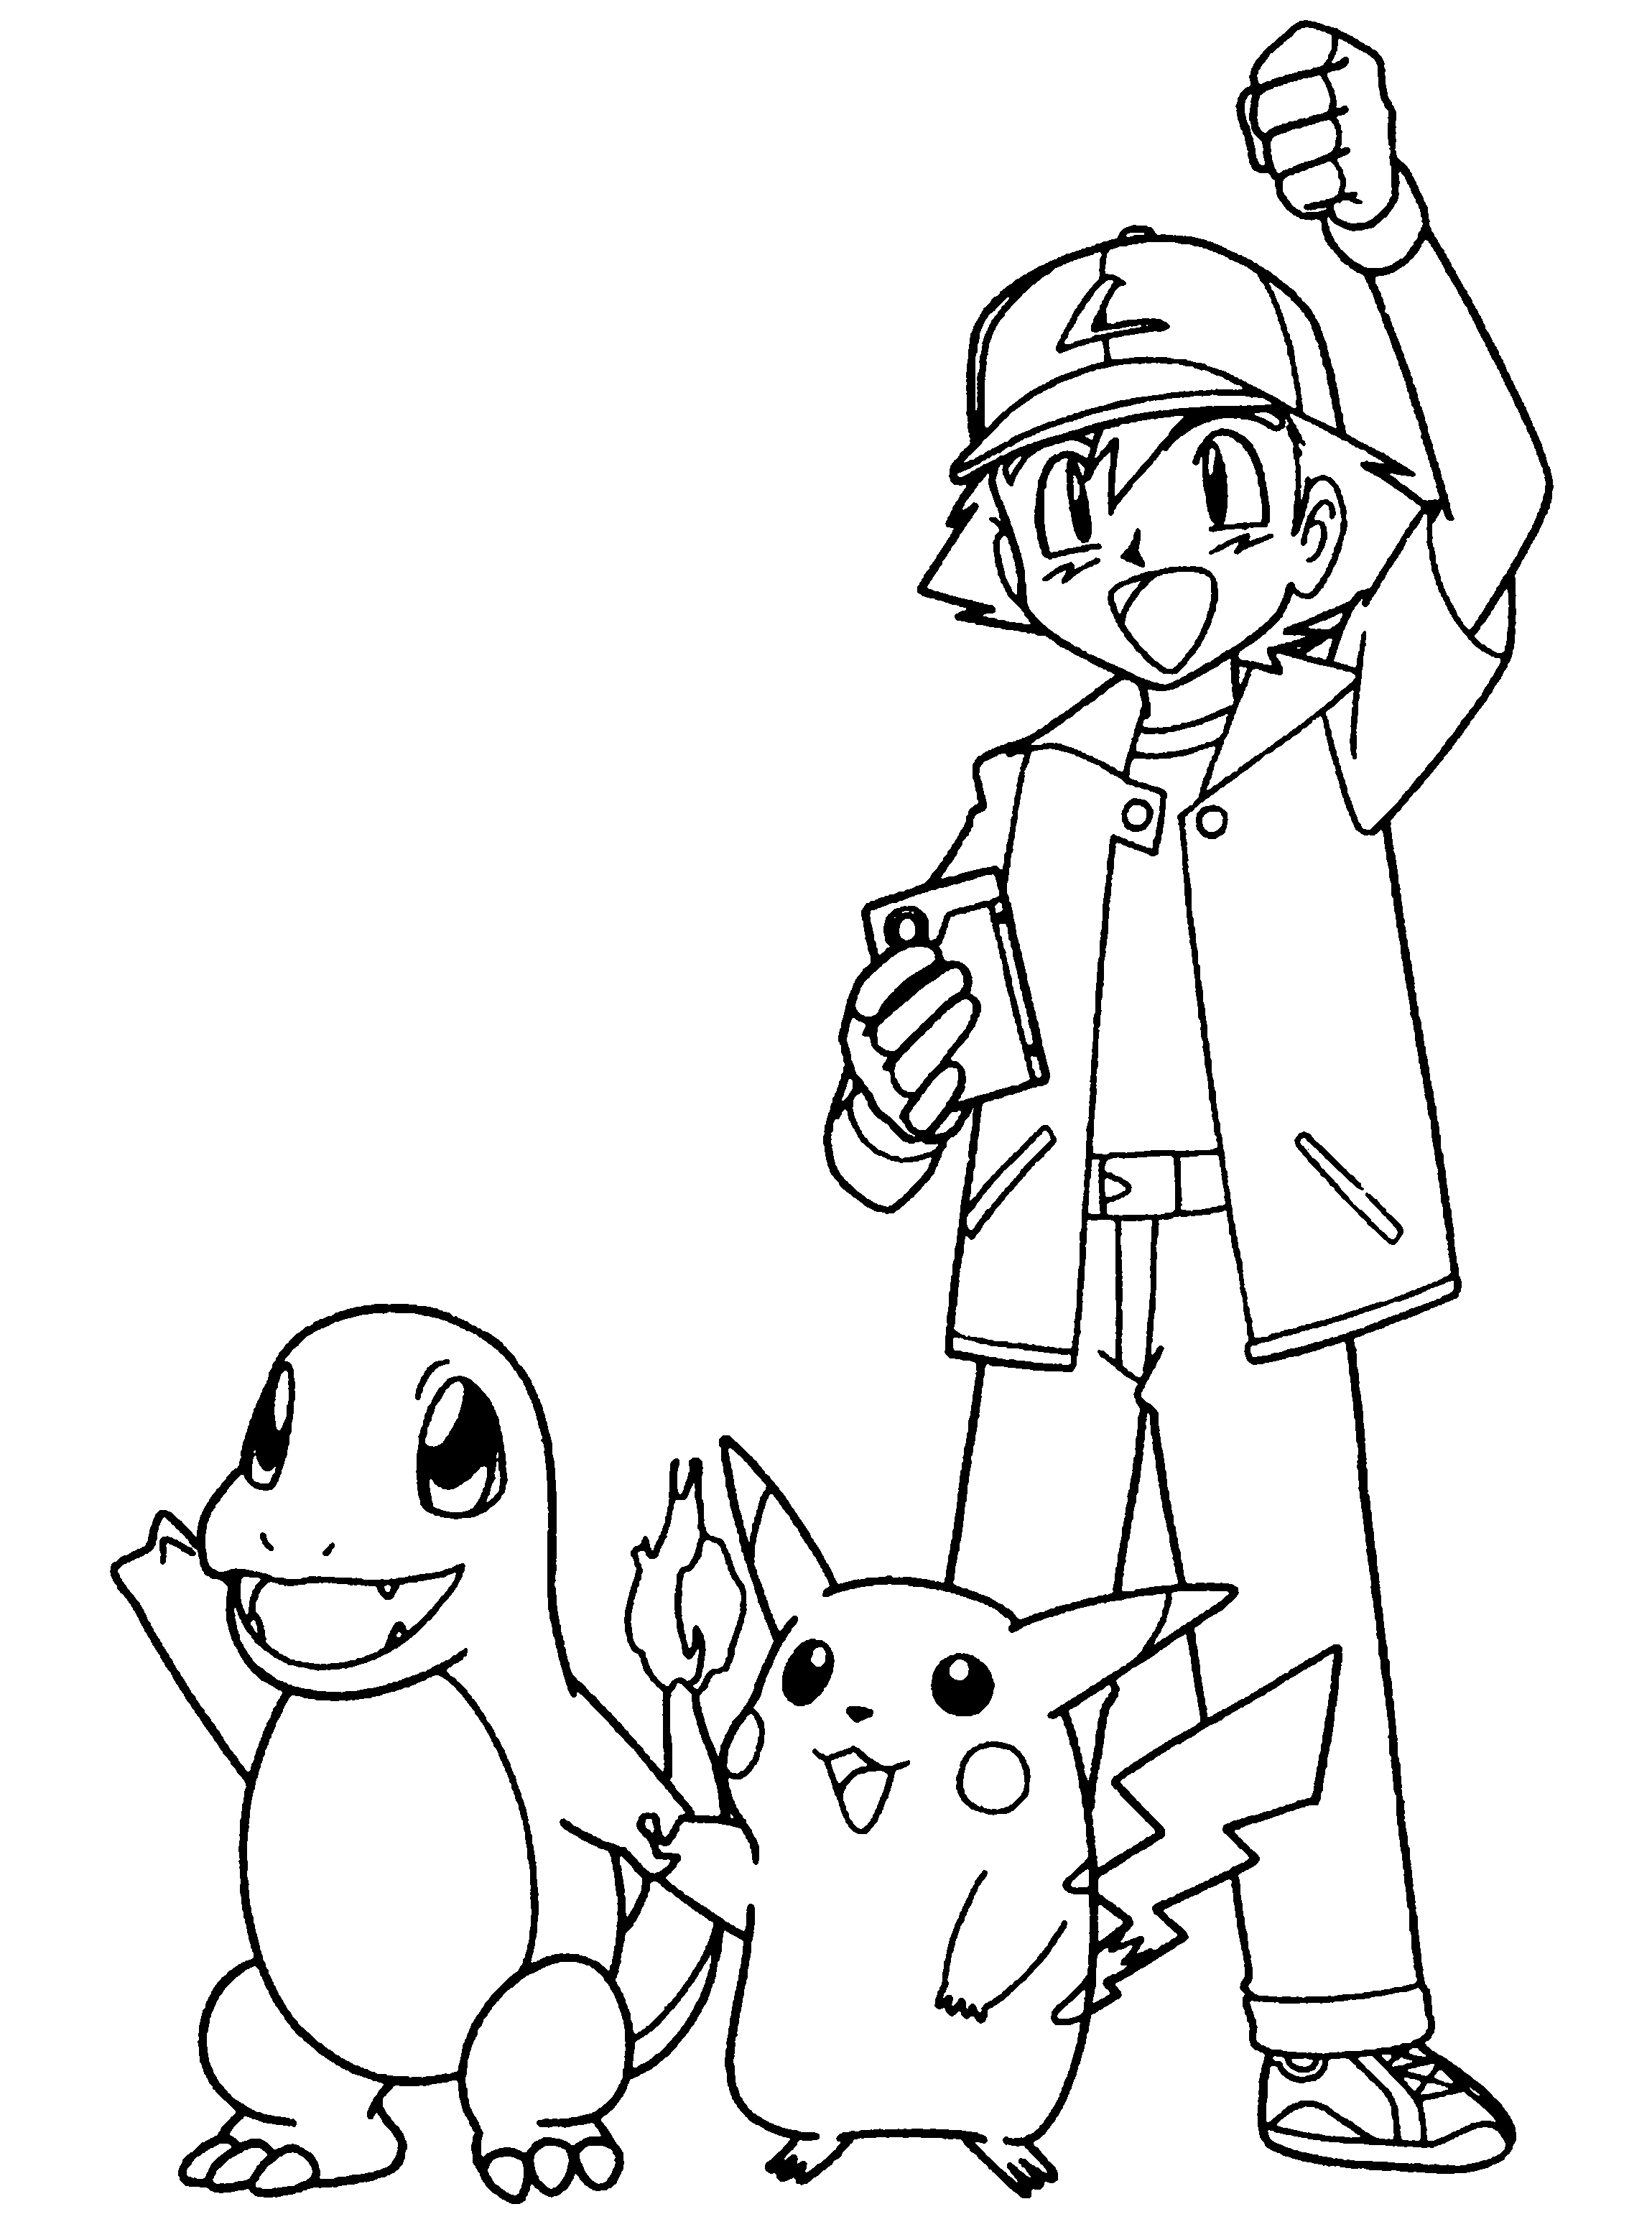 Coloring Page - Pokemon coloring pages 280